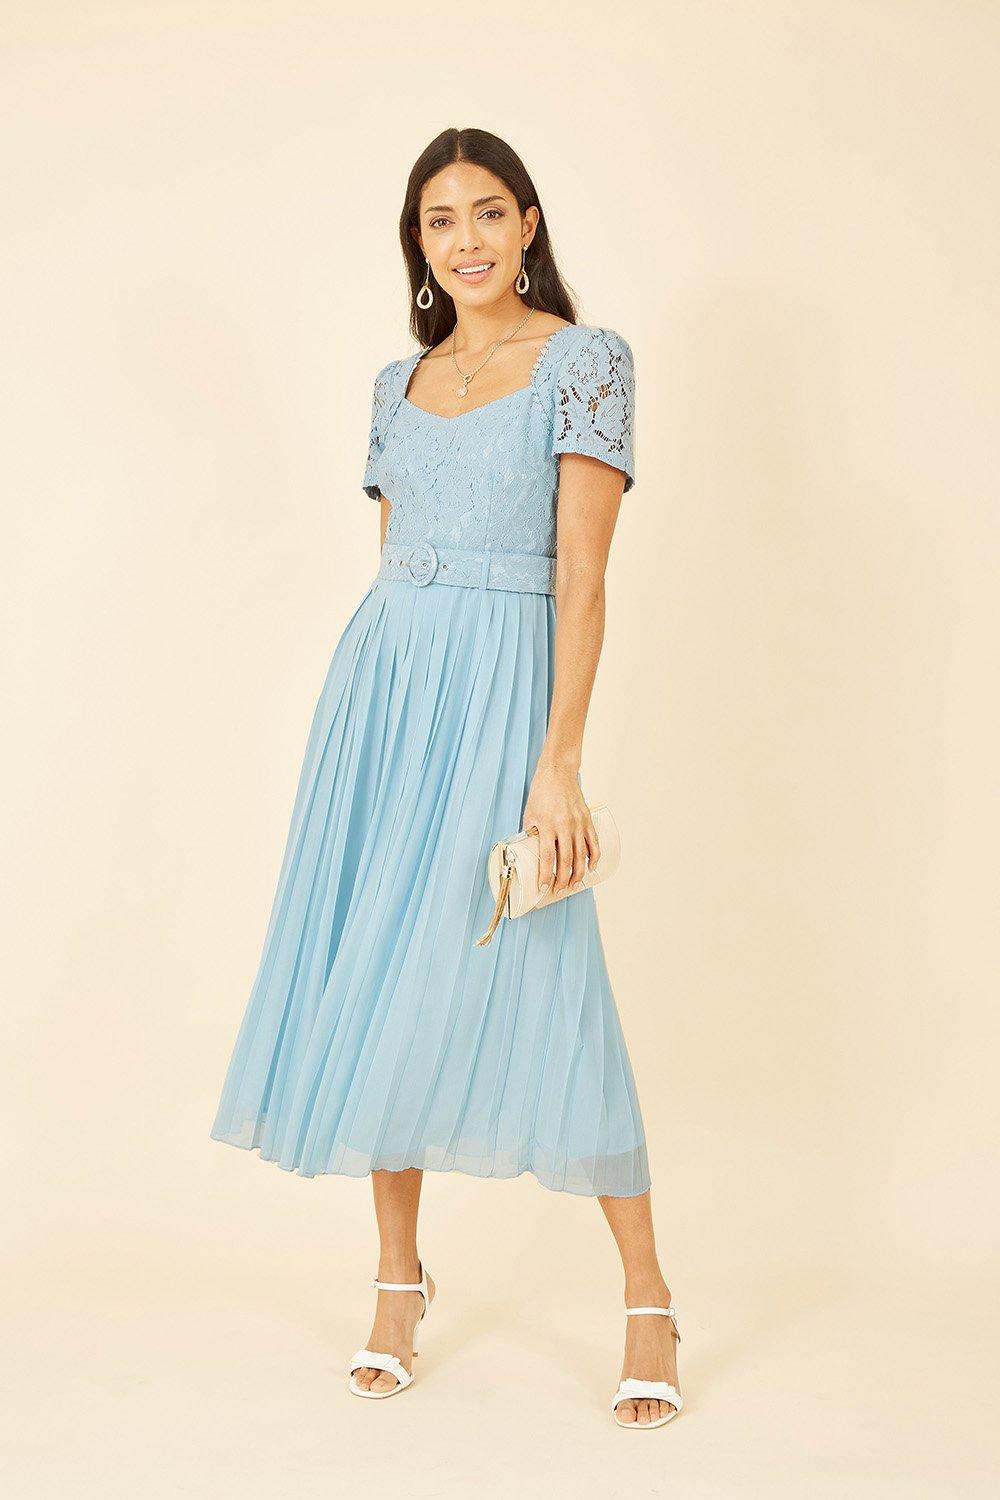 Blue Lace Dress With Pleated Skirt and Belt